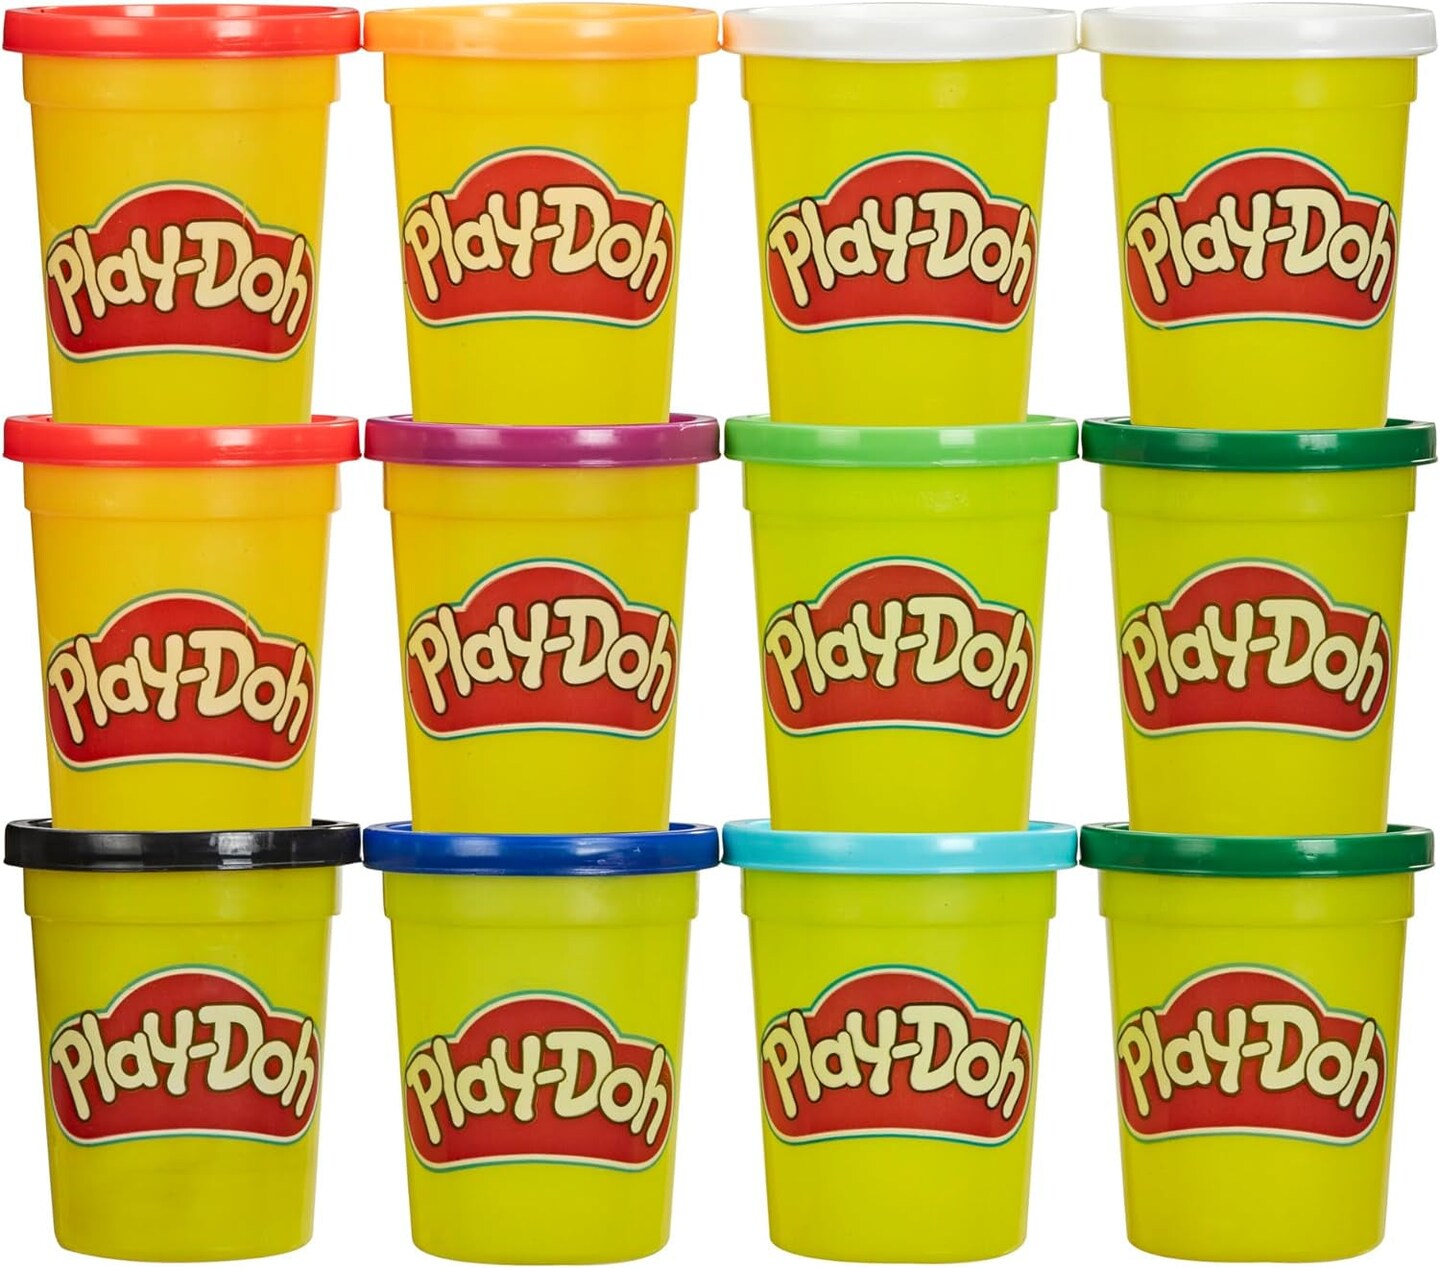 Play-Doh Bulk 12-Pack of Yellow Non-Toxic Modeling Compound, 4